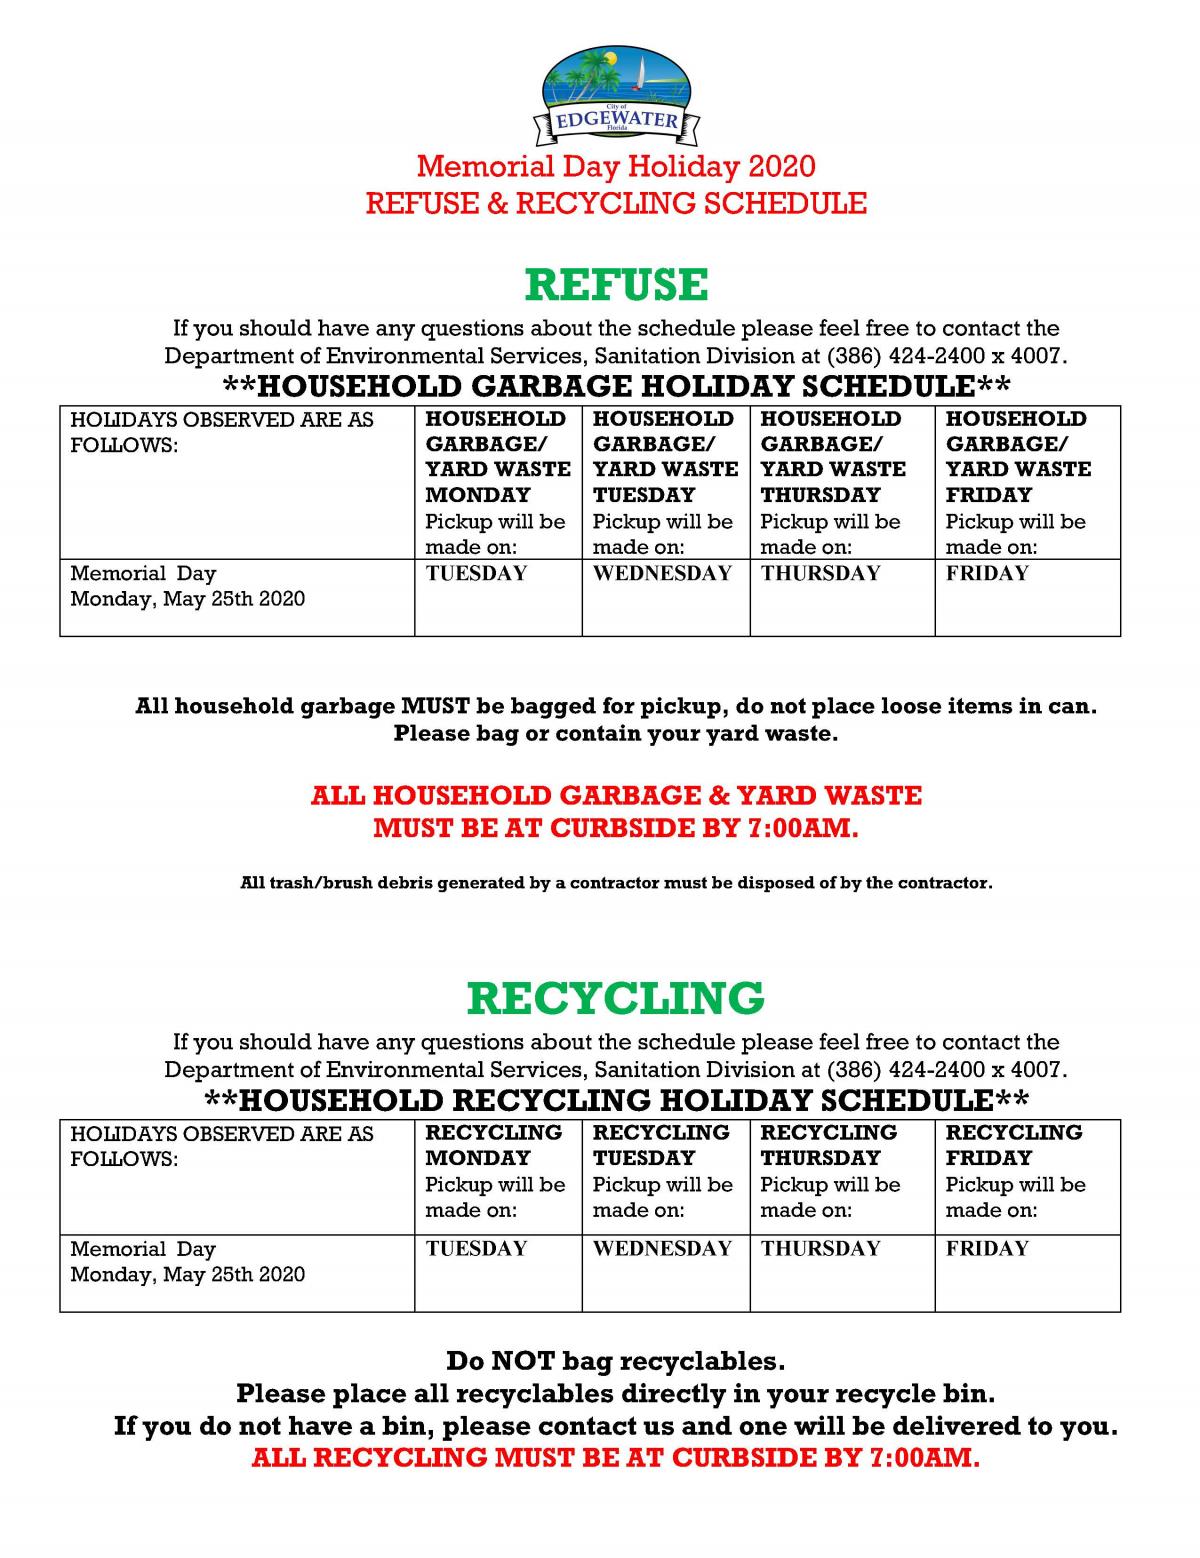 Memorial Day HolidayRefuse & Recycling Schedule City of Edgewater